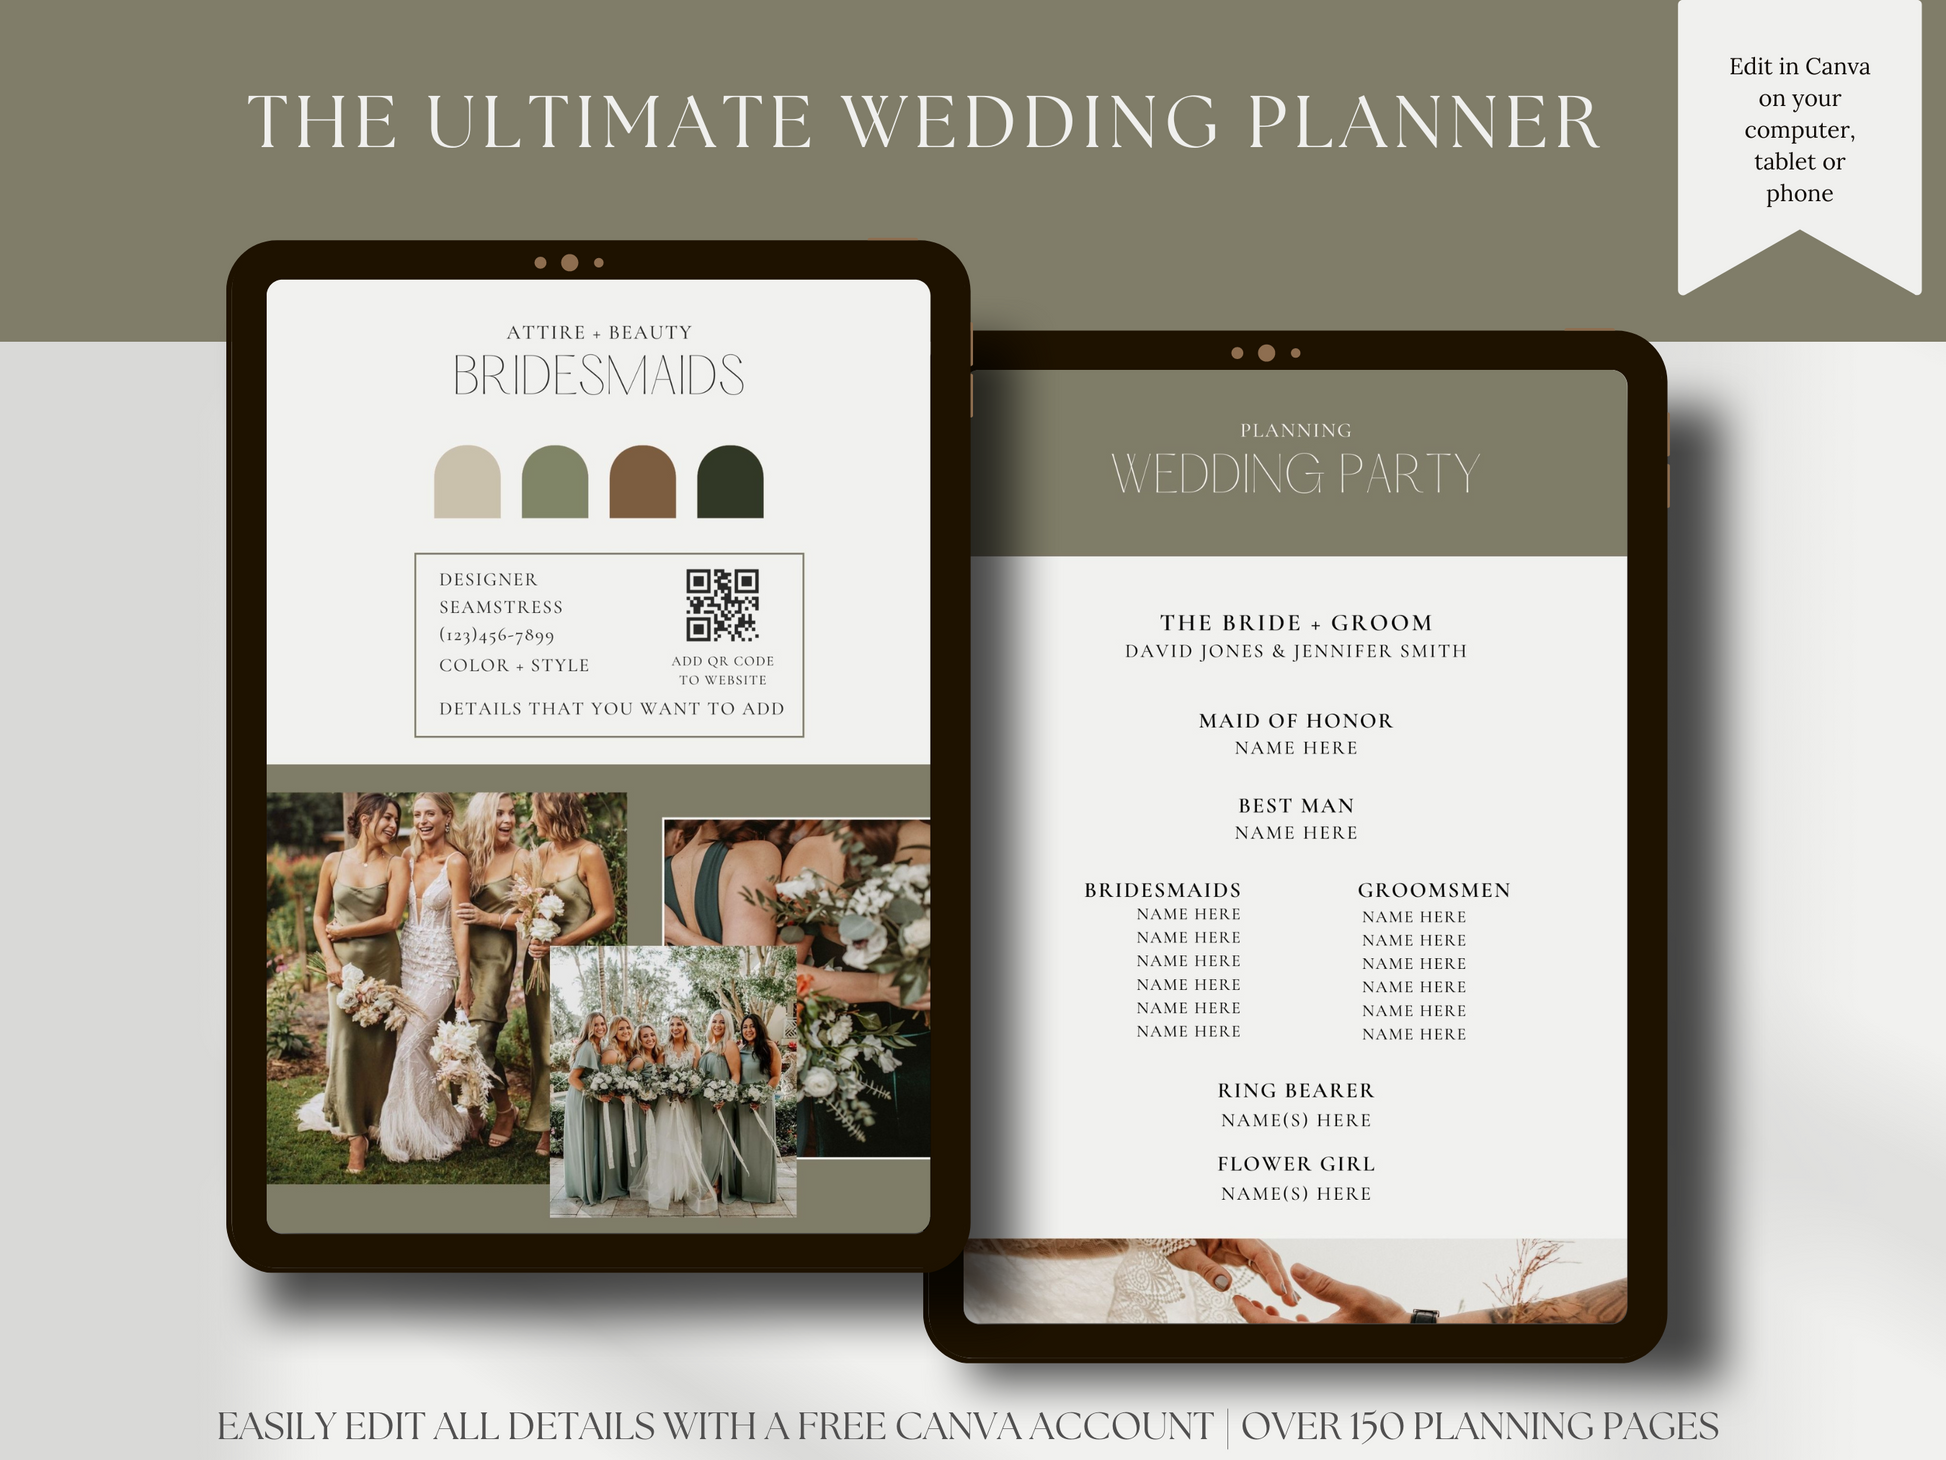 Digital Wedding Planner With Over 150 Pages of Content